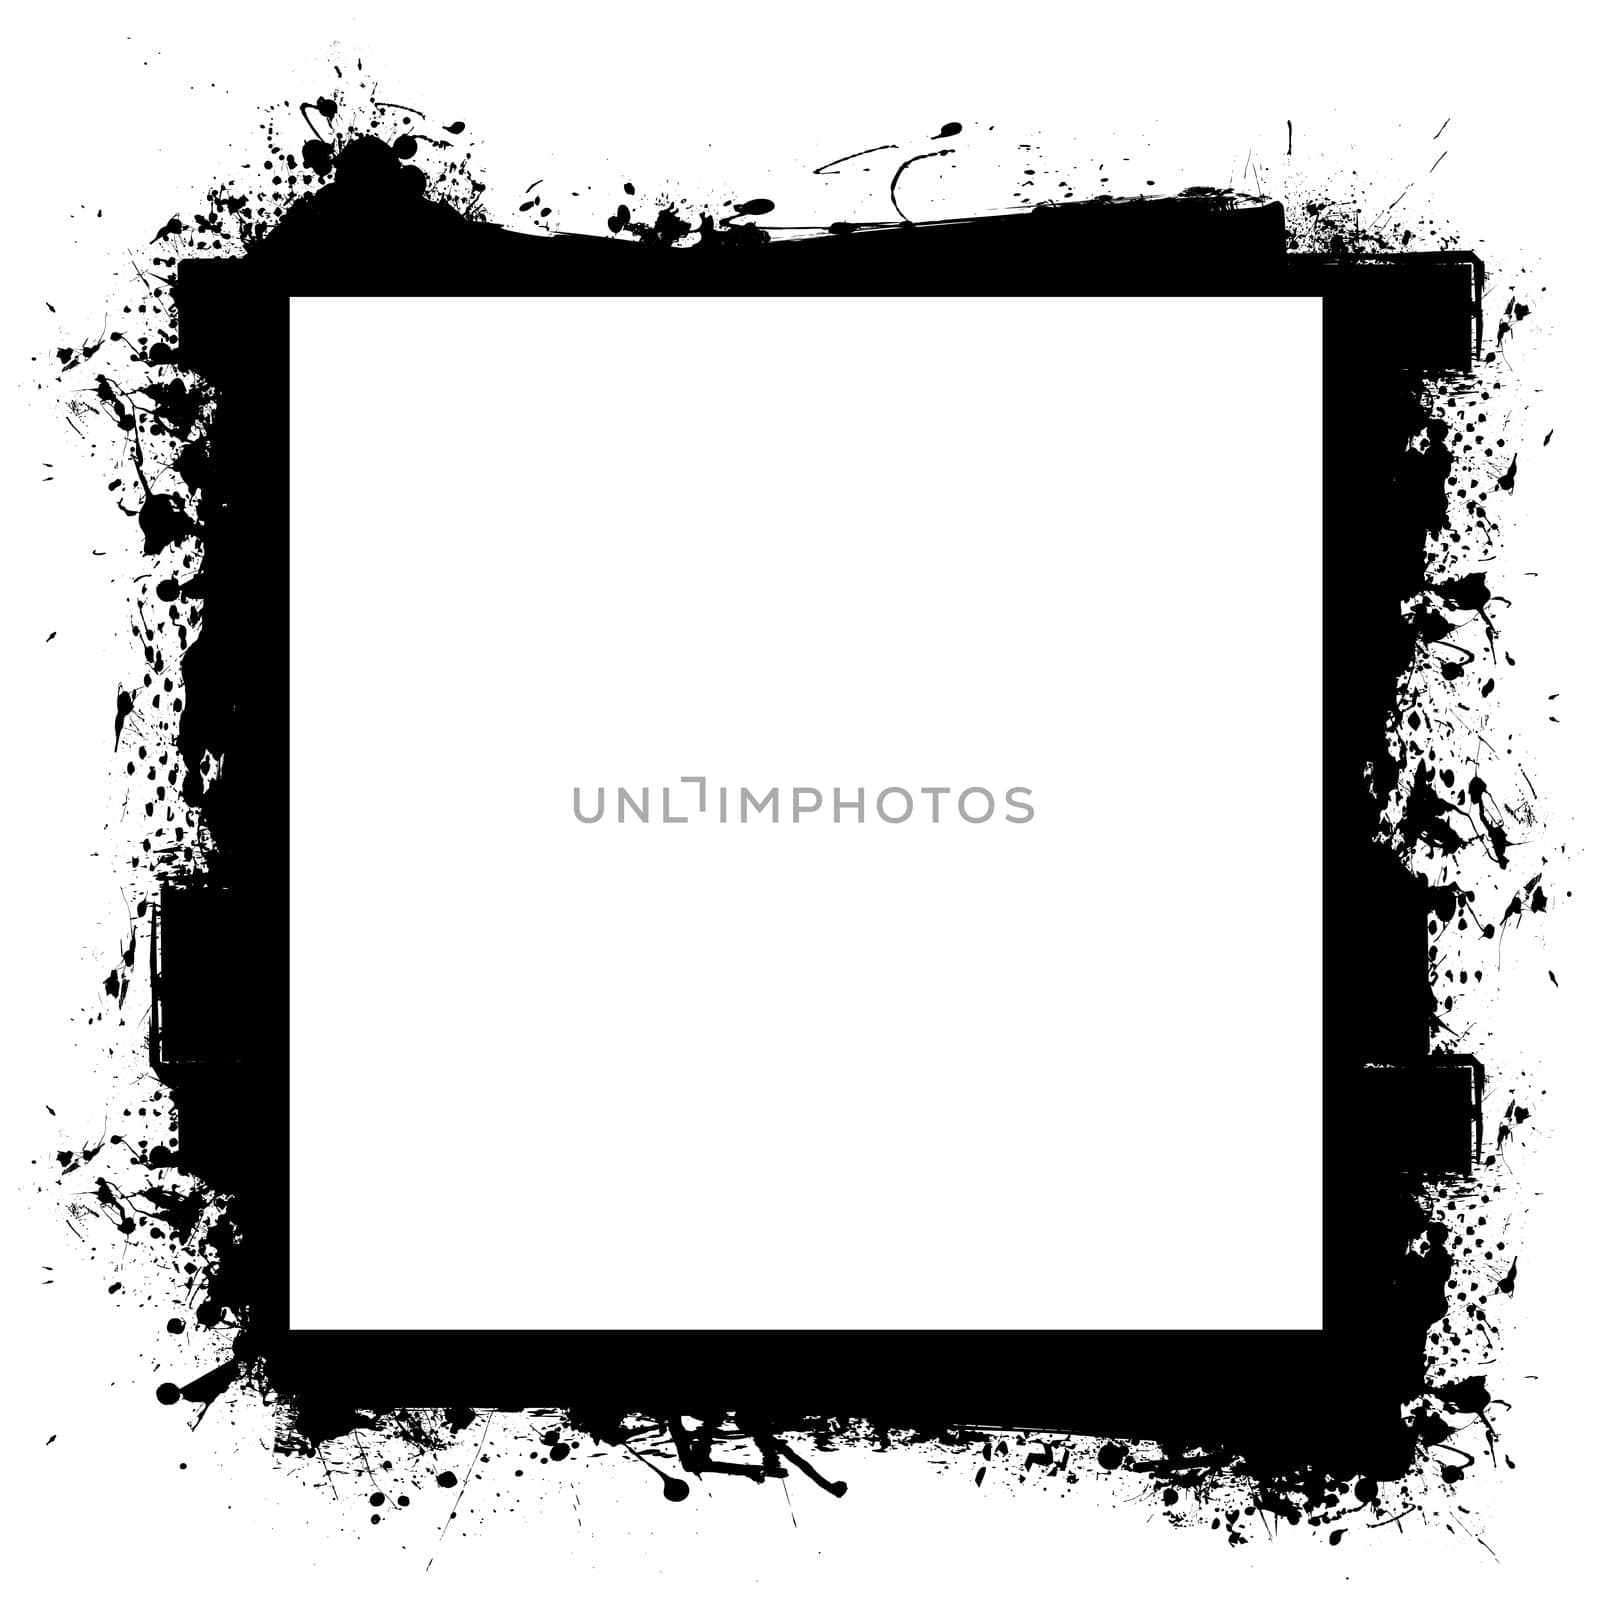 Abstract black grunge border frame with room to add your own photograph